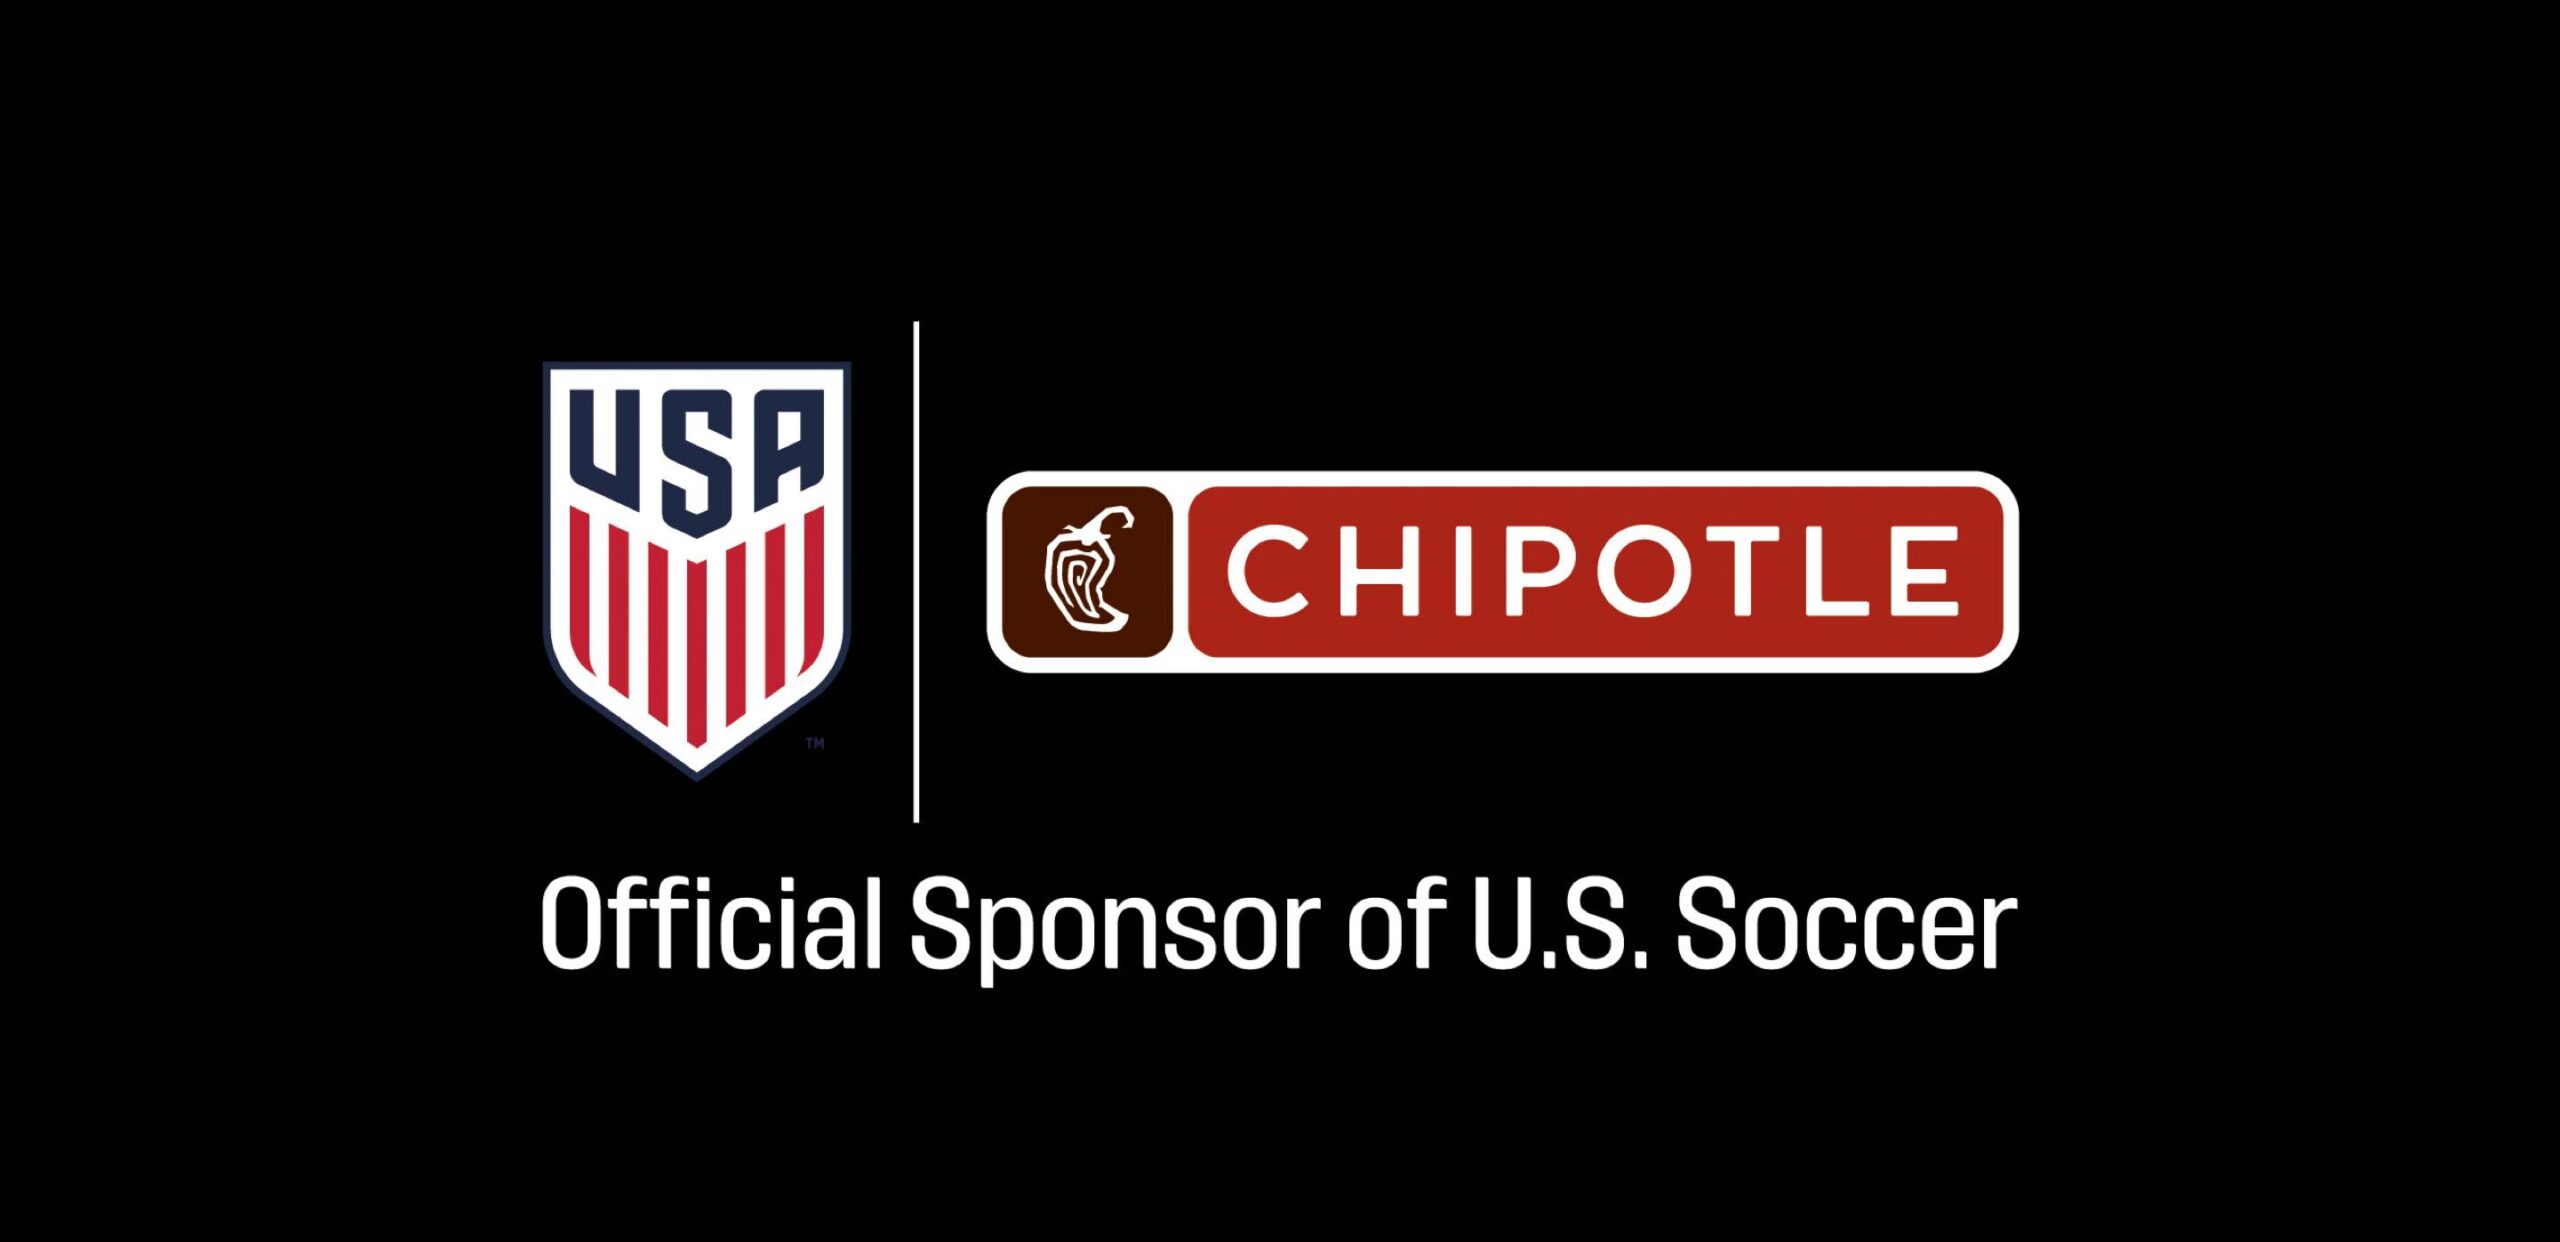 REMINDER: Free Chipotle Entree During the World Cup Games